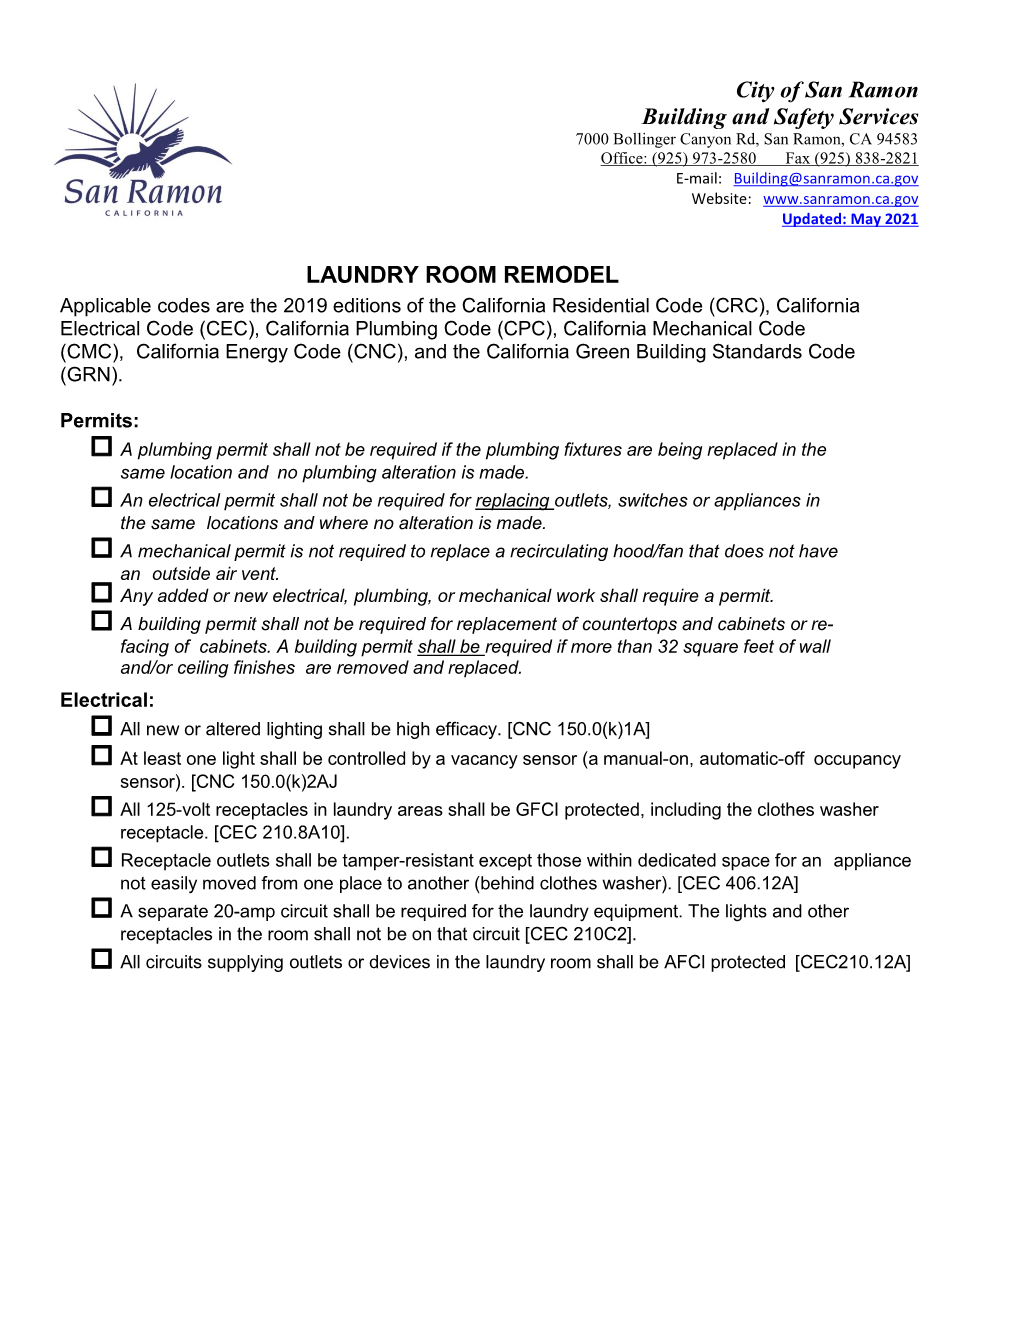 City of San Ramon Building and Safety Services LAUNDRY ROOM REMODEL